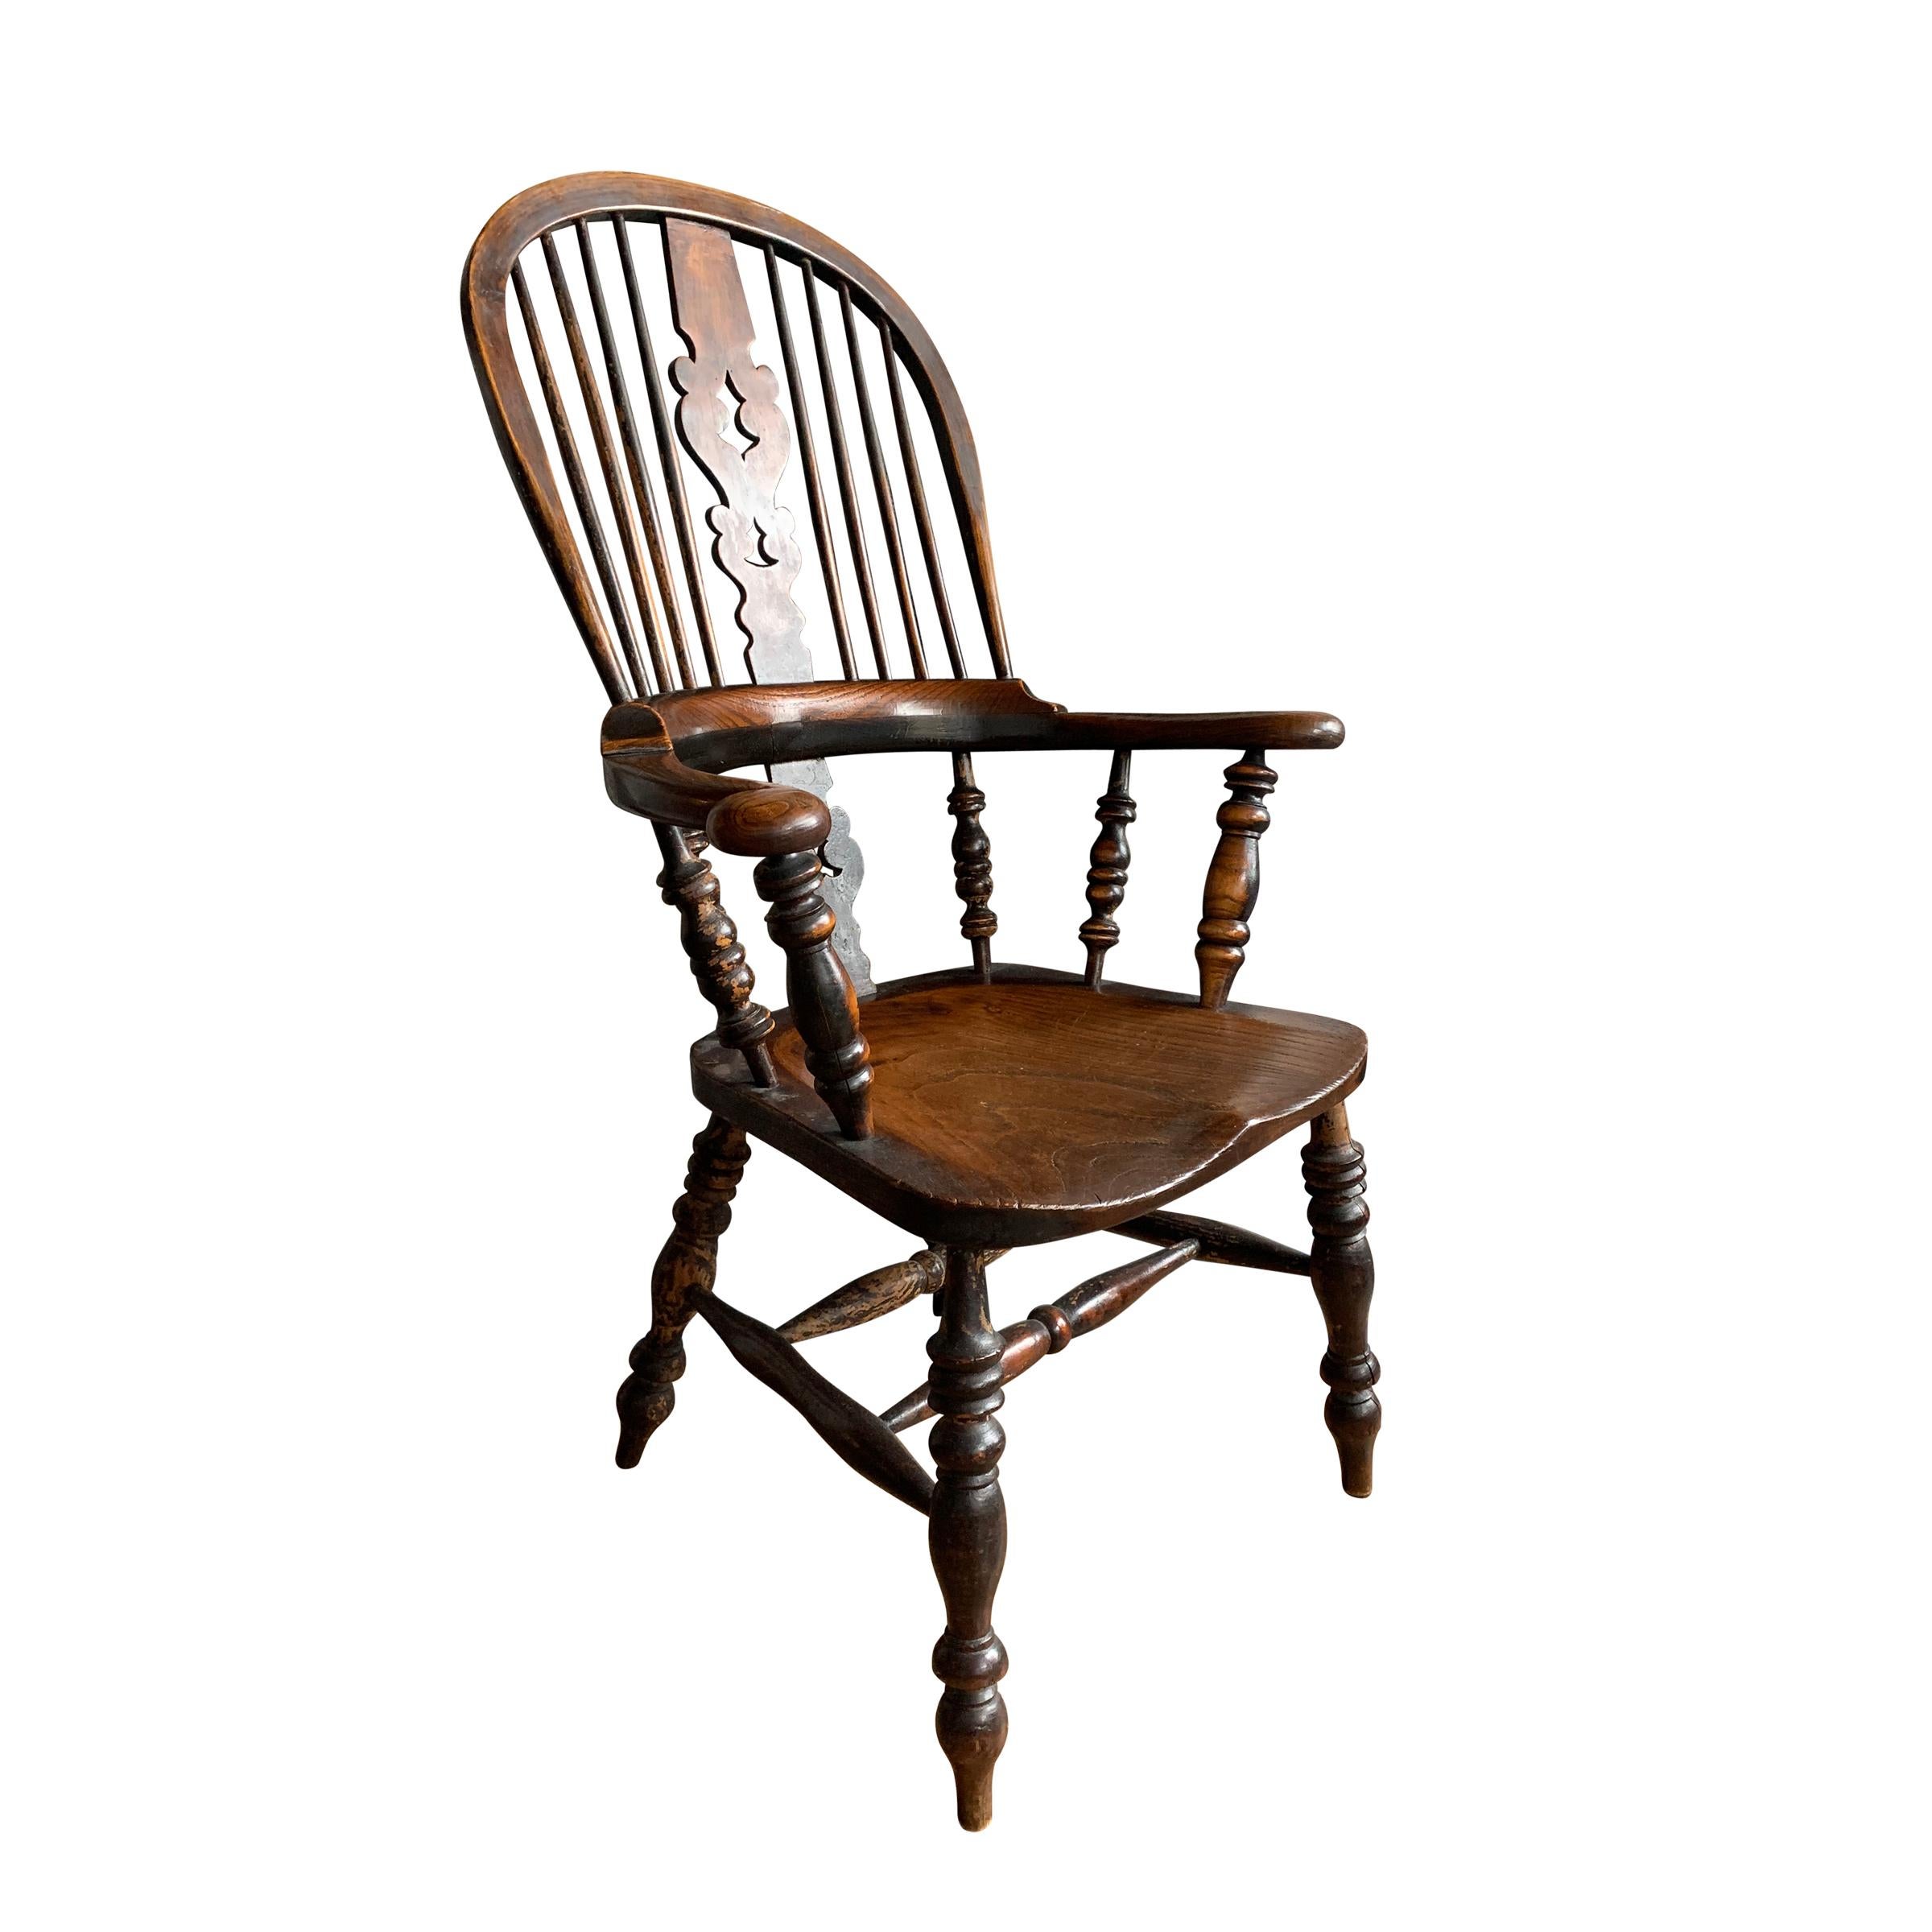 Country 19th Century English Yew Wood Windsor Chair